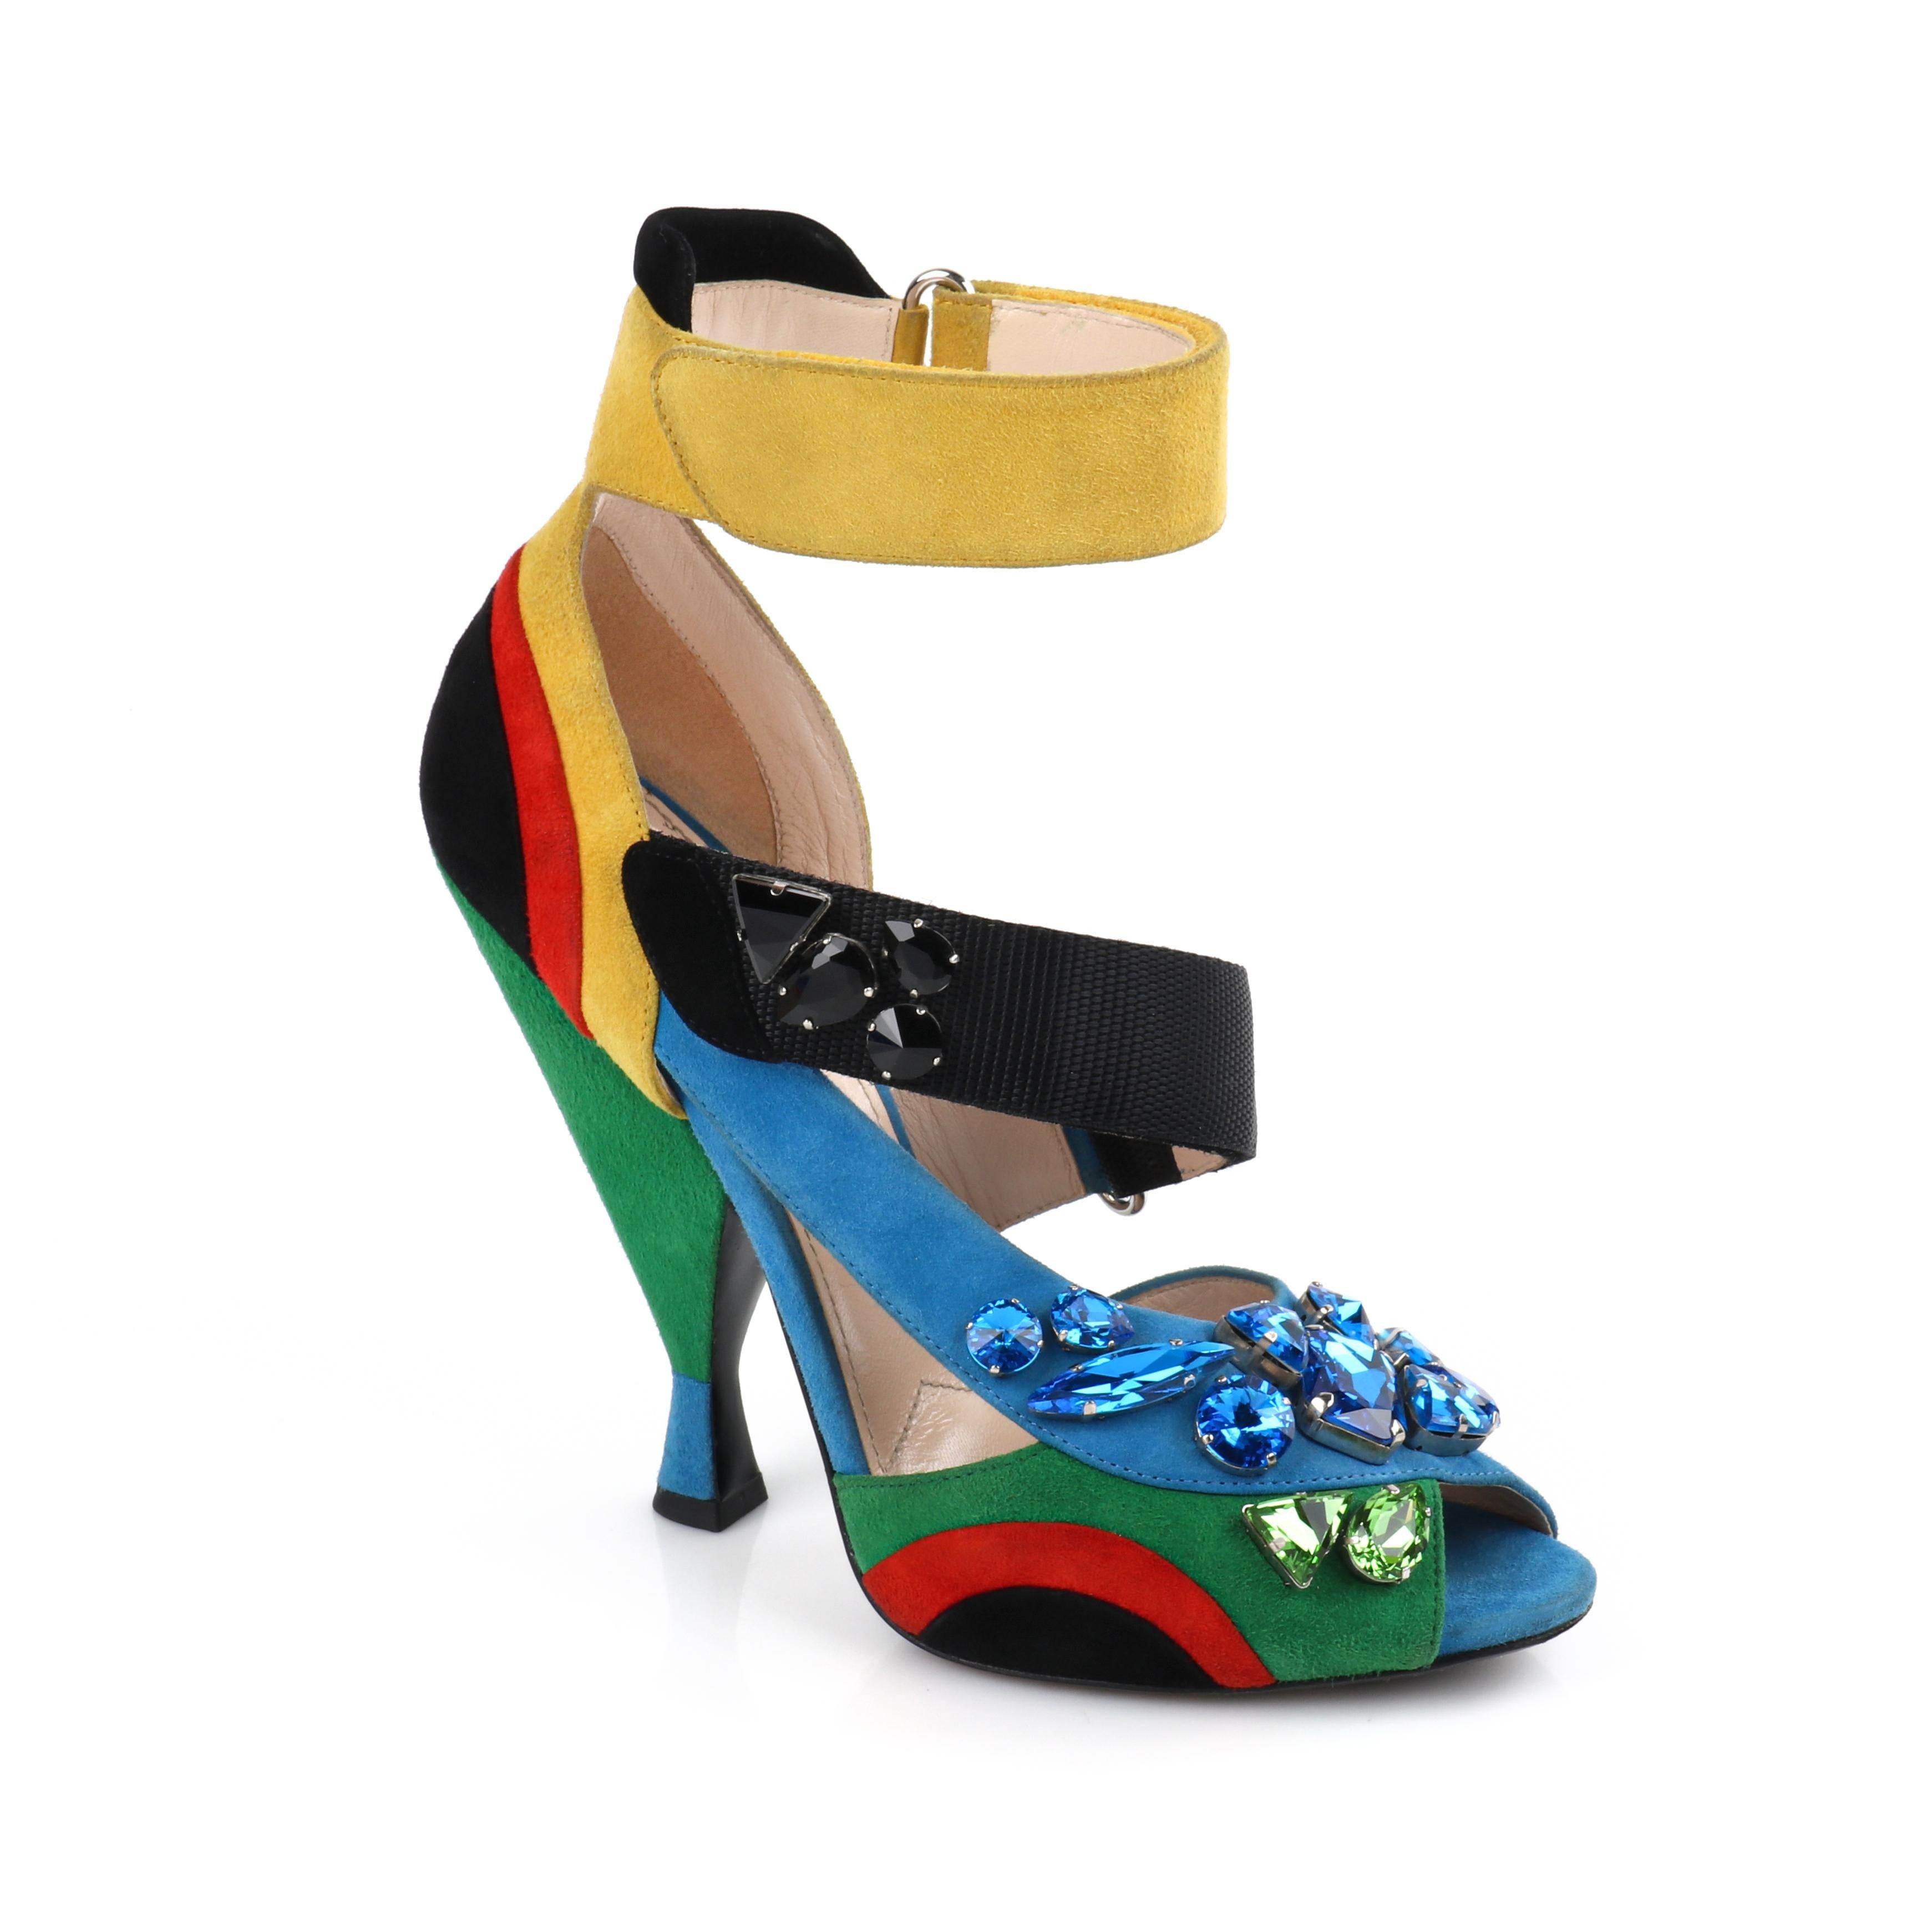 PRADA Color Block Suede Modern Abstract Jeweled Strappy Peep Toe Sandal Pumps
  
Brand / Manufacturer: Prada
Designer: Miuccia Prada
Style: Heels
Marked Size: 39
Color(s): Shades of blue, green, yellow, red, black (exterior, detail); nude